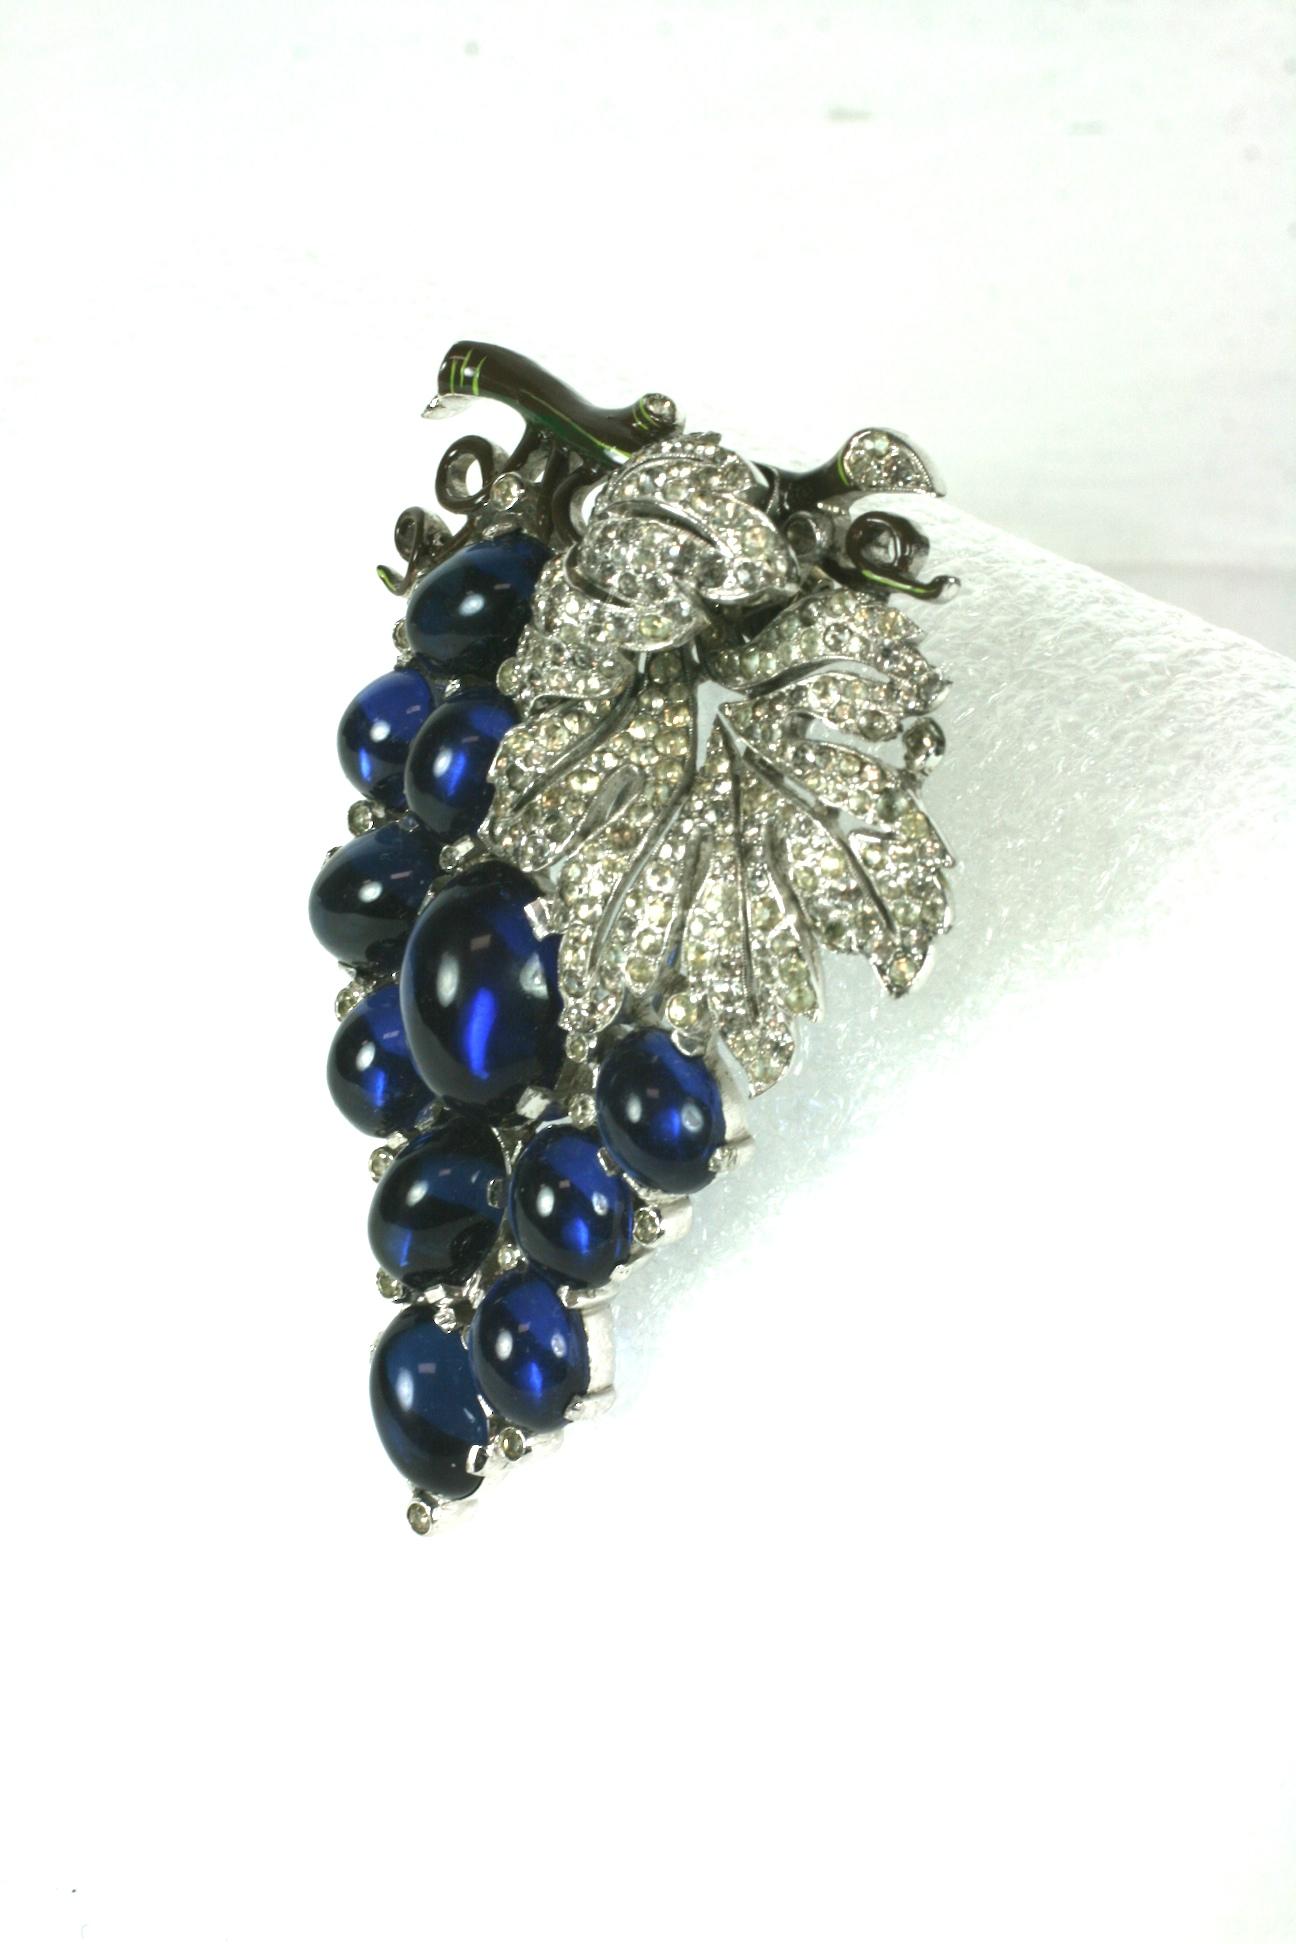 Exceptional  and rare Alfred Philippe for Trifari grape cluster fur clip brooch of faux sapphire cabochons with crystal rhinestone pave. Large in scale with finely detailed cold enameling on the branch and vines. Set in rhodium plate base